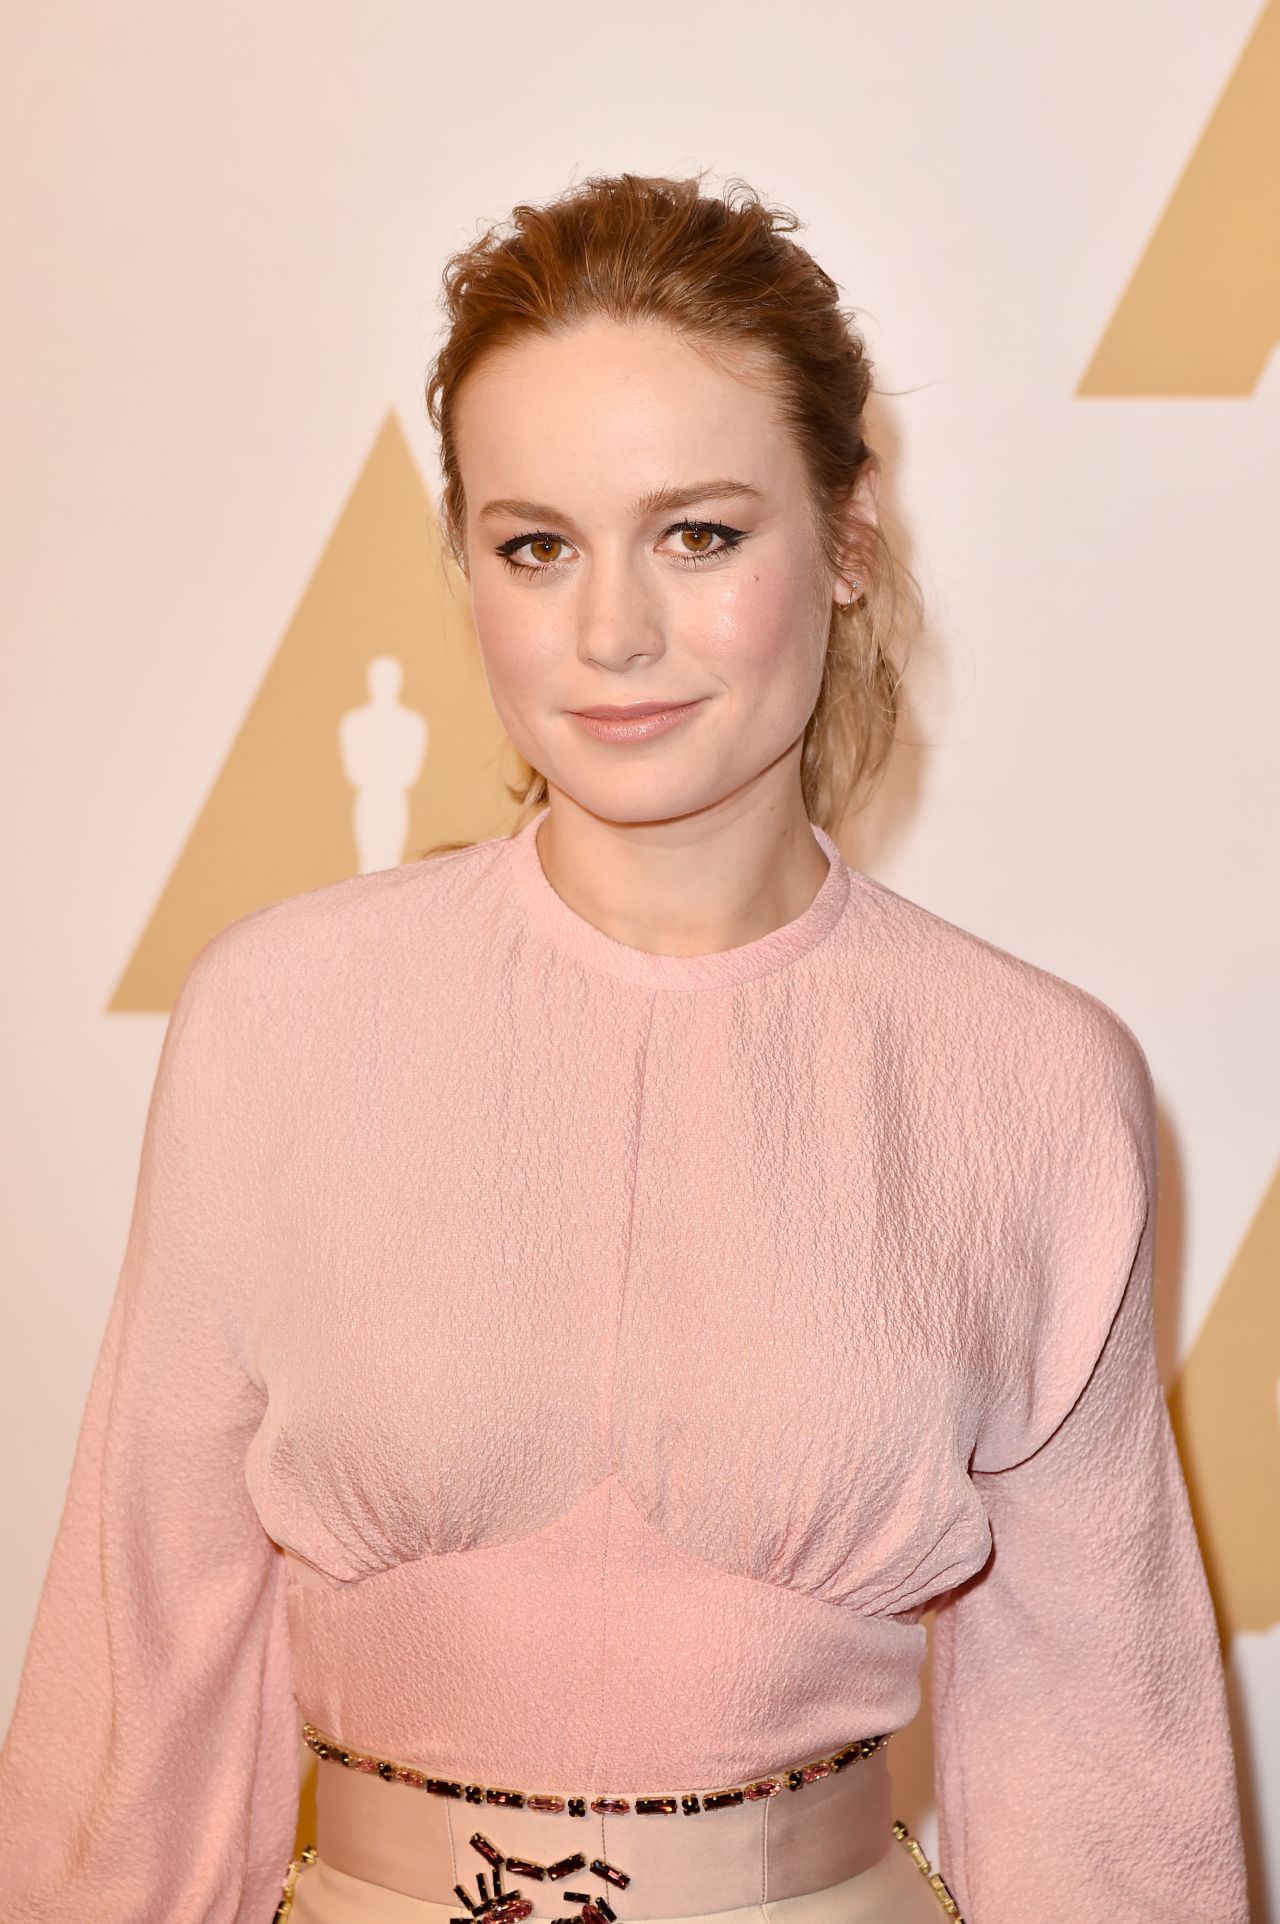 brie-larson-academy-awards-2016-nominee-luncheon-in-beverly-hills-5